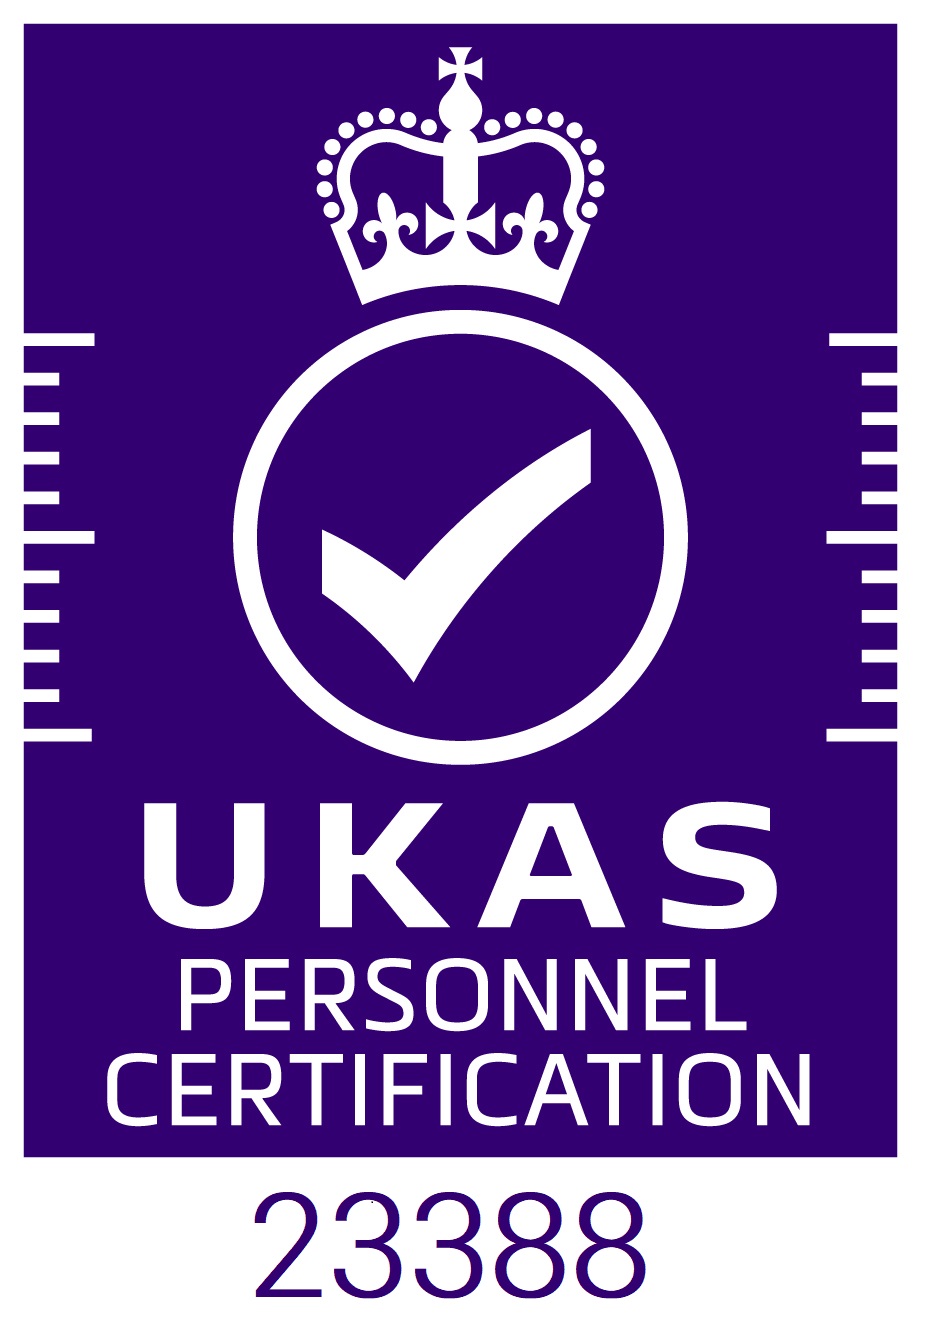 UKAS Accreditation Symbol white on purple Personnel Certification